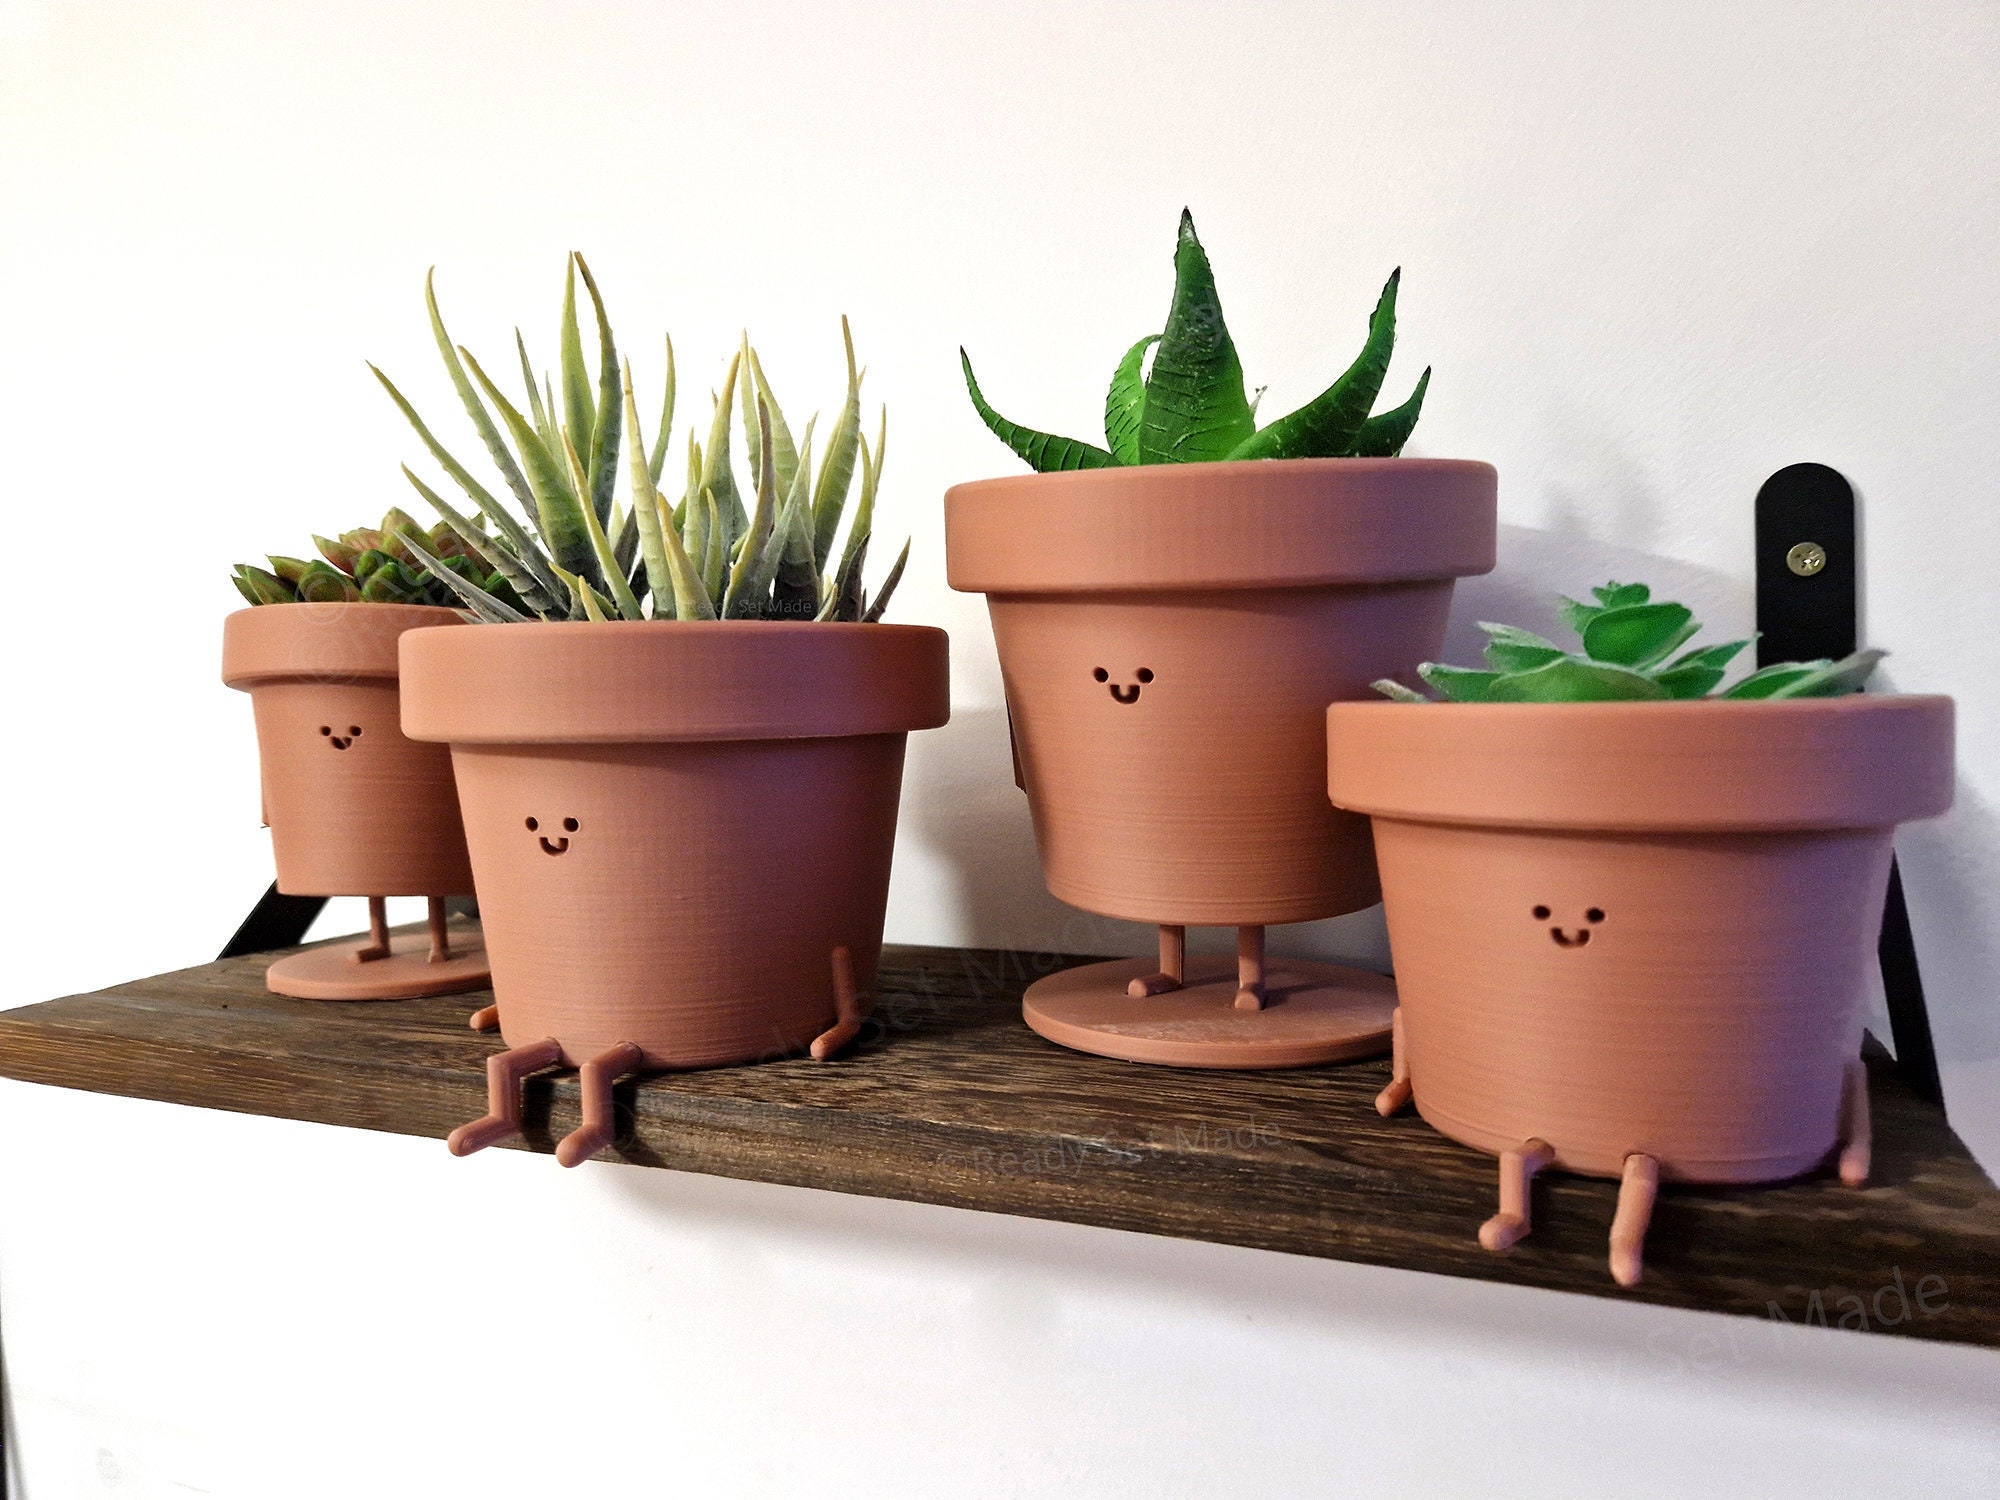 Some cute 'Pot' Holders with a cute succulent🌱💚